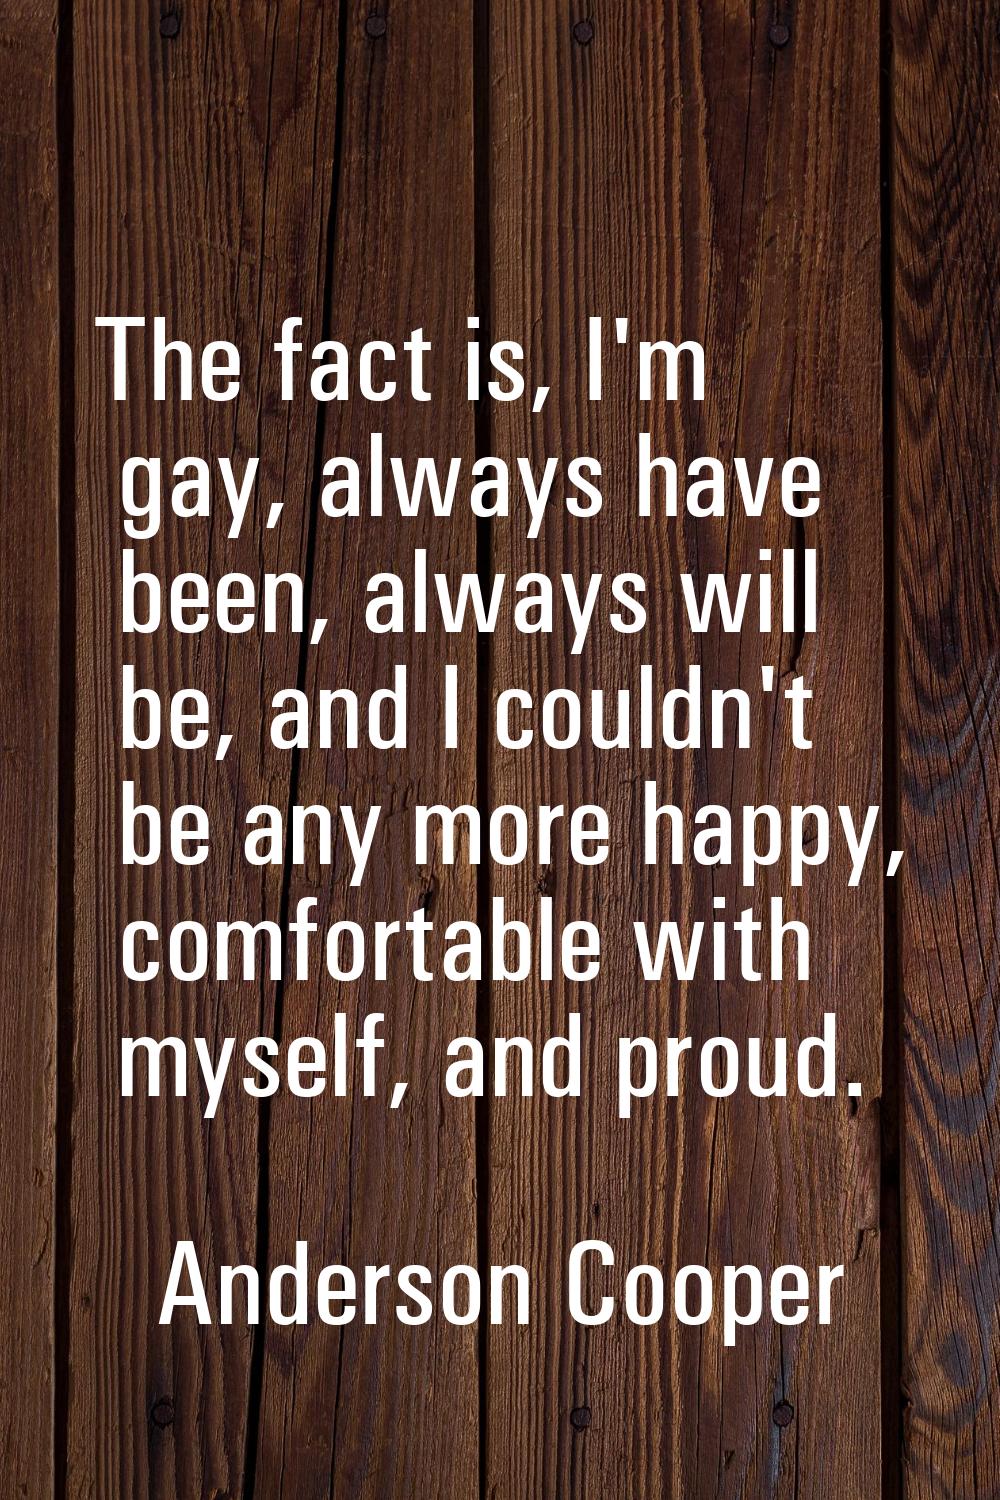 The fact is, I'm gay, always have been, always will be, and I couldn't be any more happy, comfortab